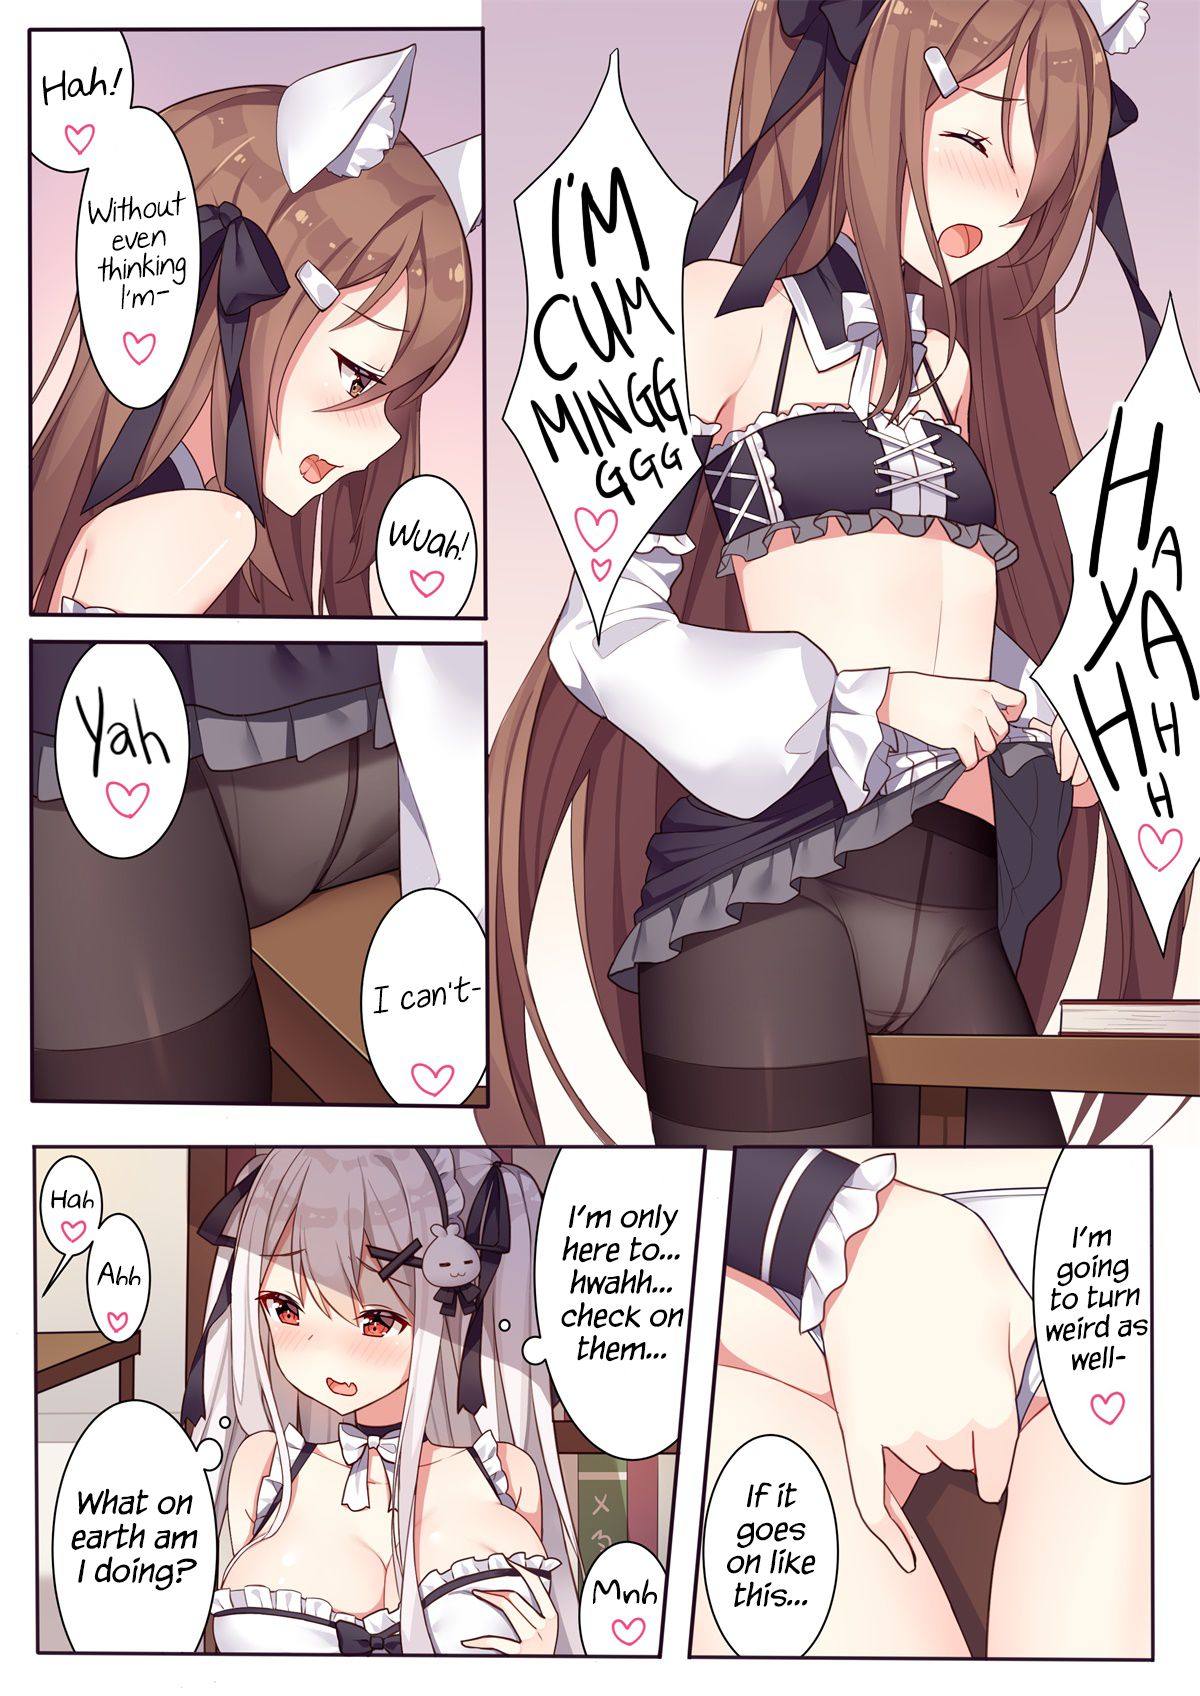 [Niliu Chahui (Sela)] Girls and the King's Tea Party [English] [Lei Scans][SFW] page 16 full